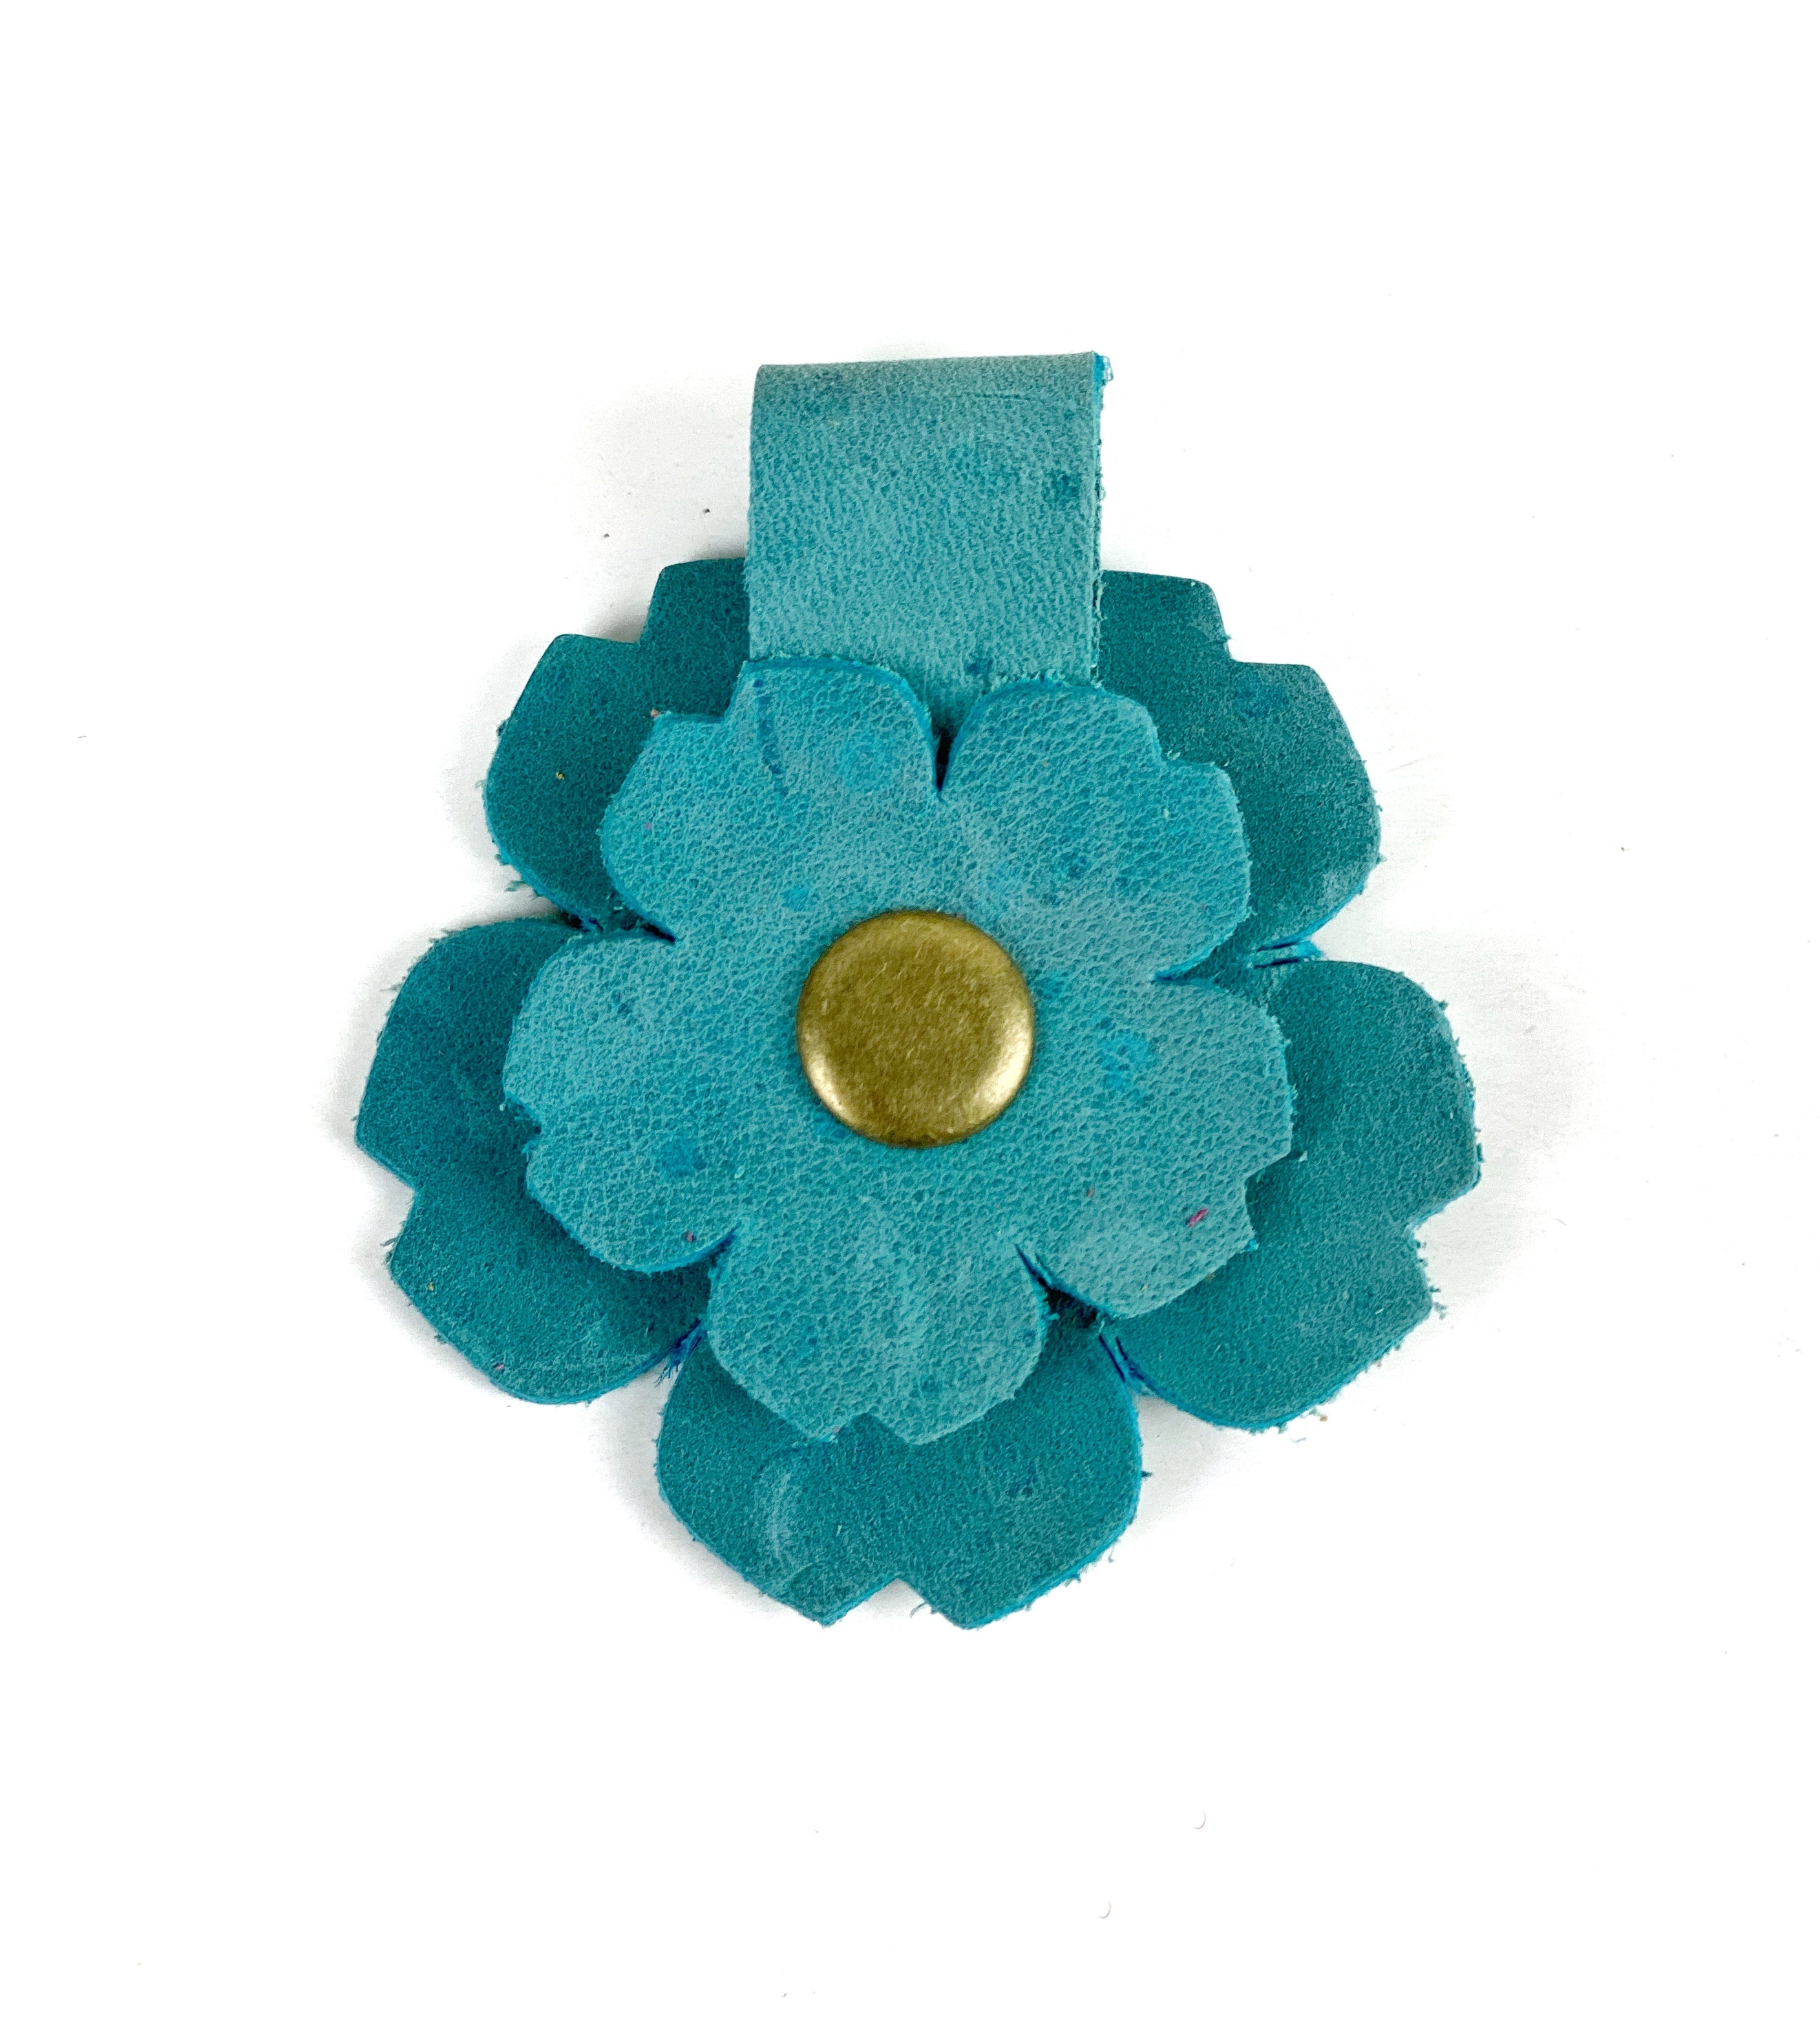 Scalloped Edge Snap on Leather Flower Bag Purse Charm